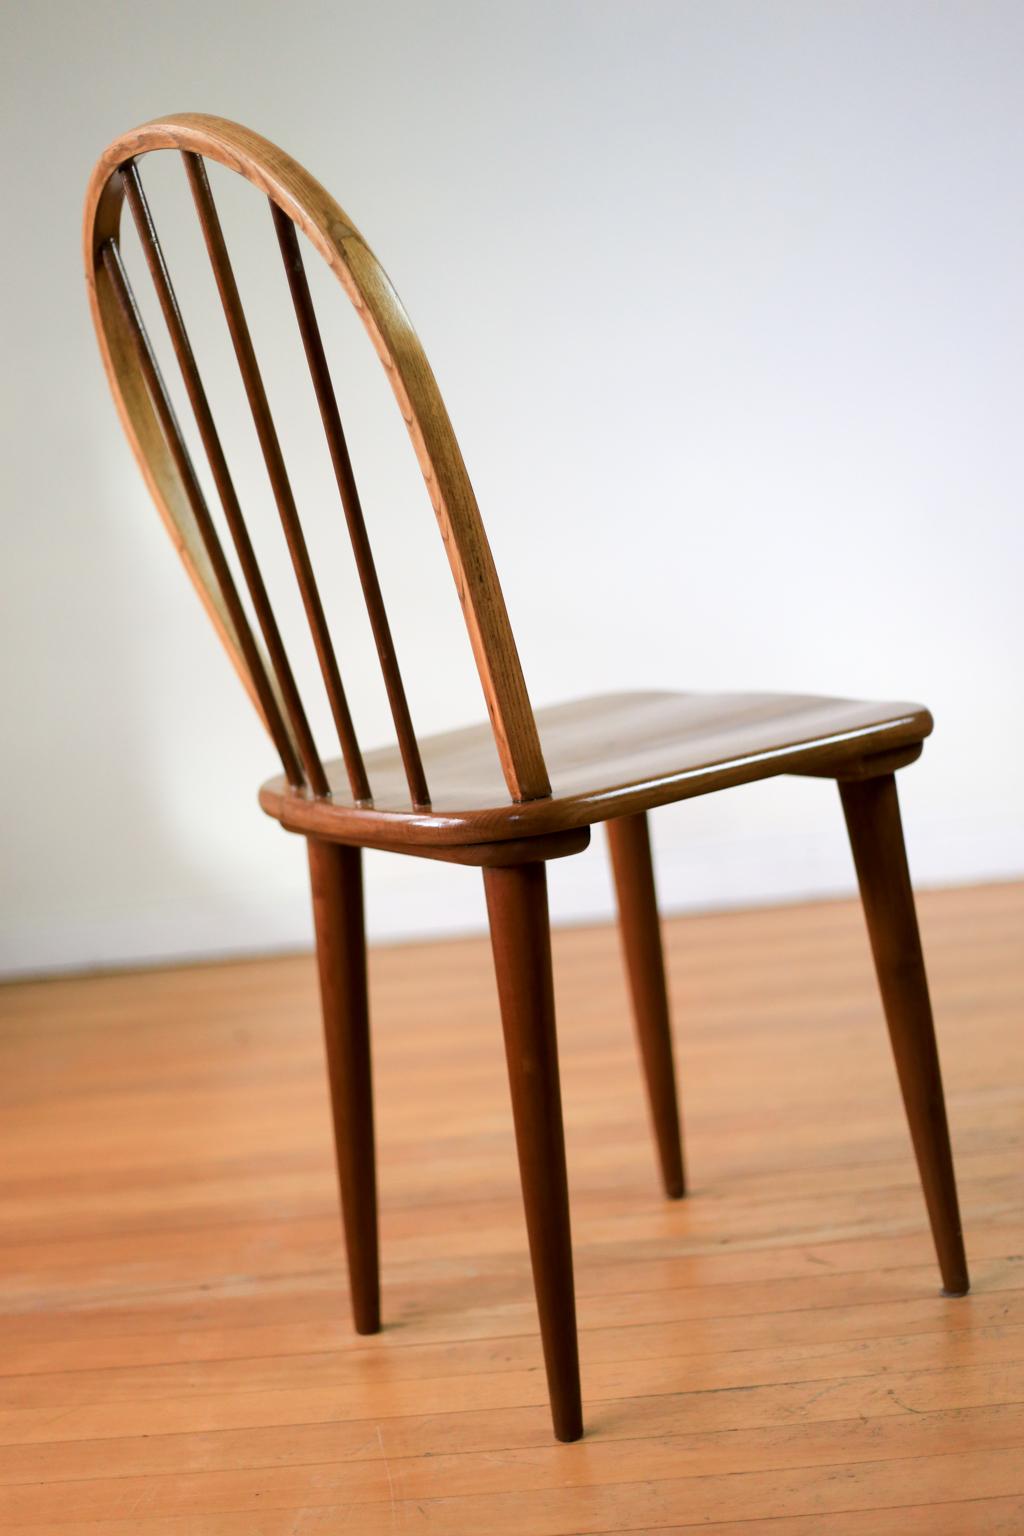 Imbuia Two Bow-Back Windsor Chairs by E.E. Meyer for Binnehuis, South Africa For Sale